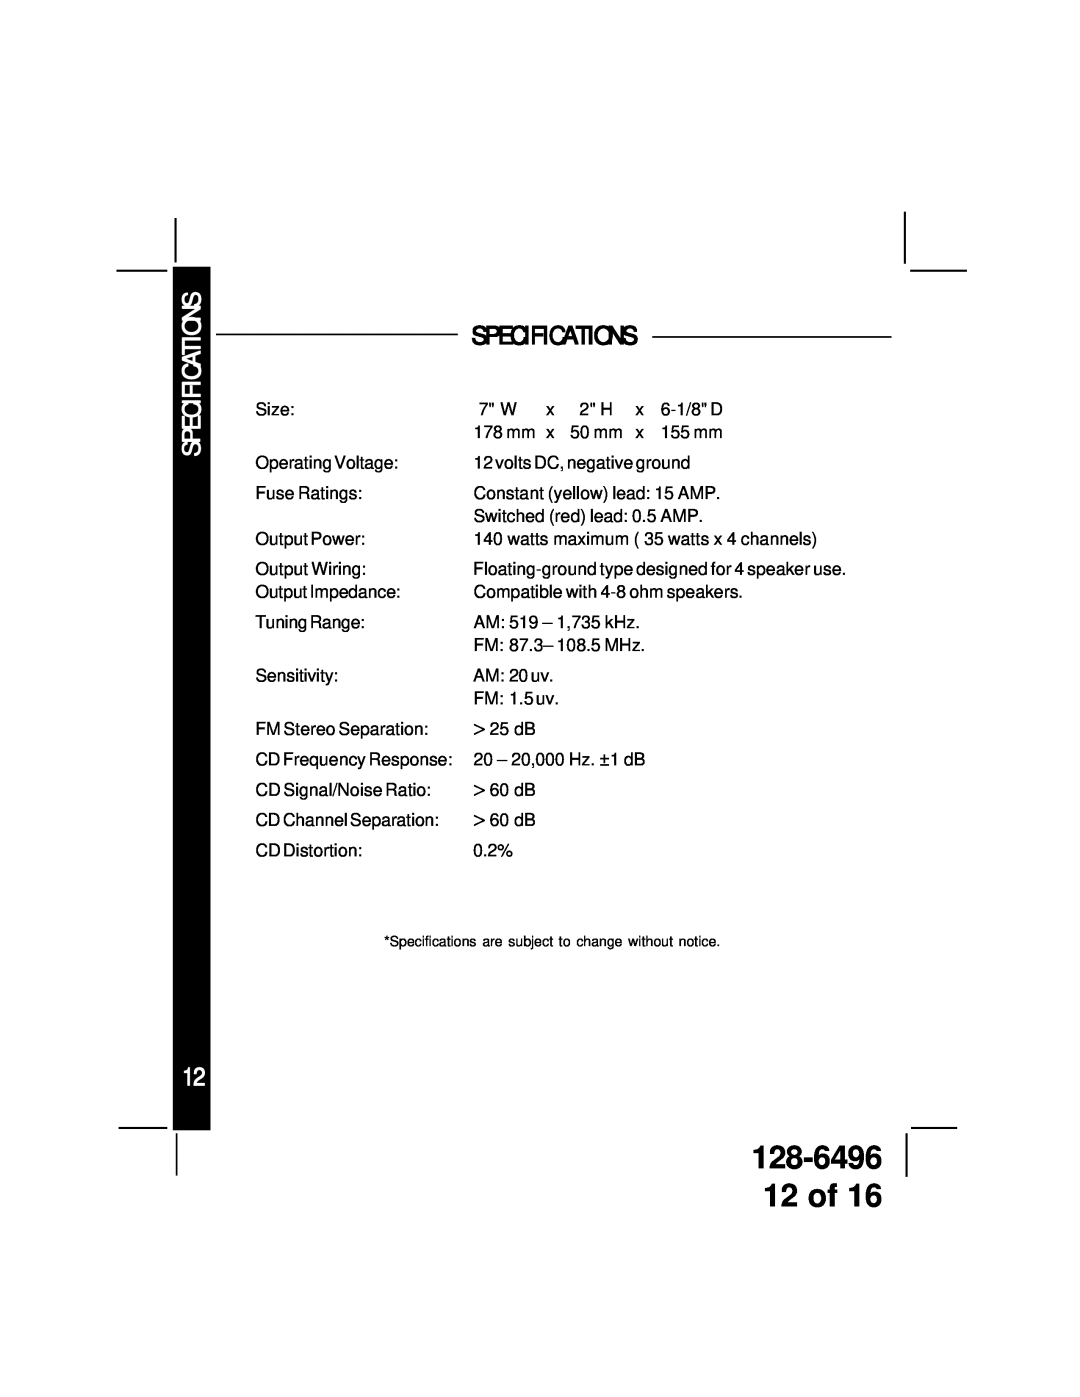 Audiovox ACD-13 manual 128-6496 12 of, Specifications 